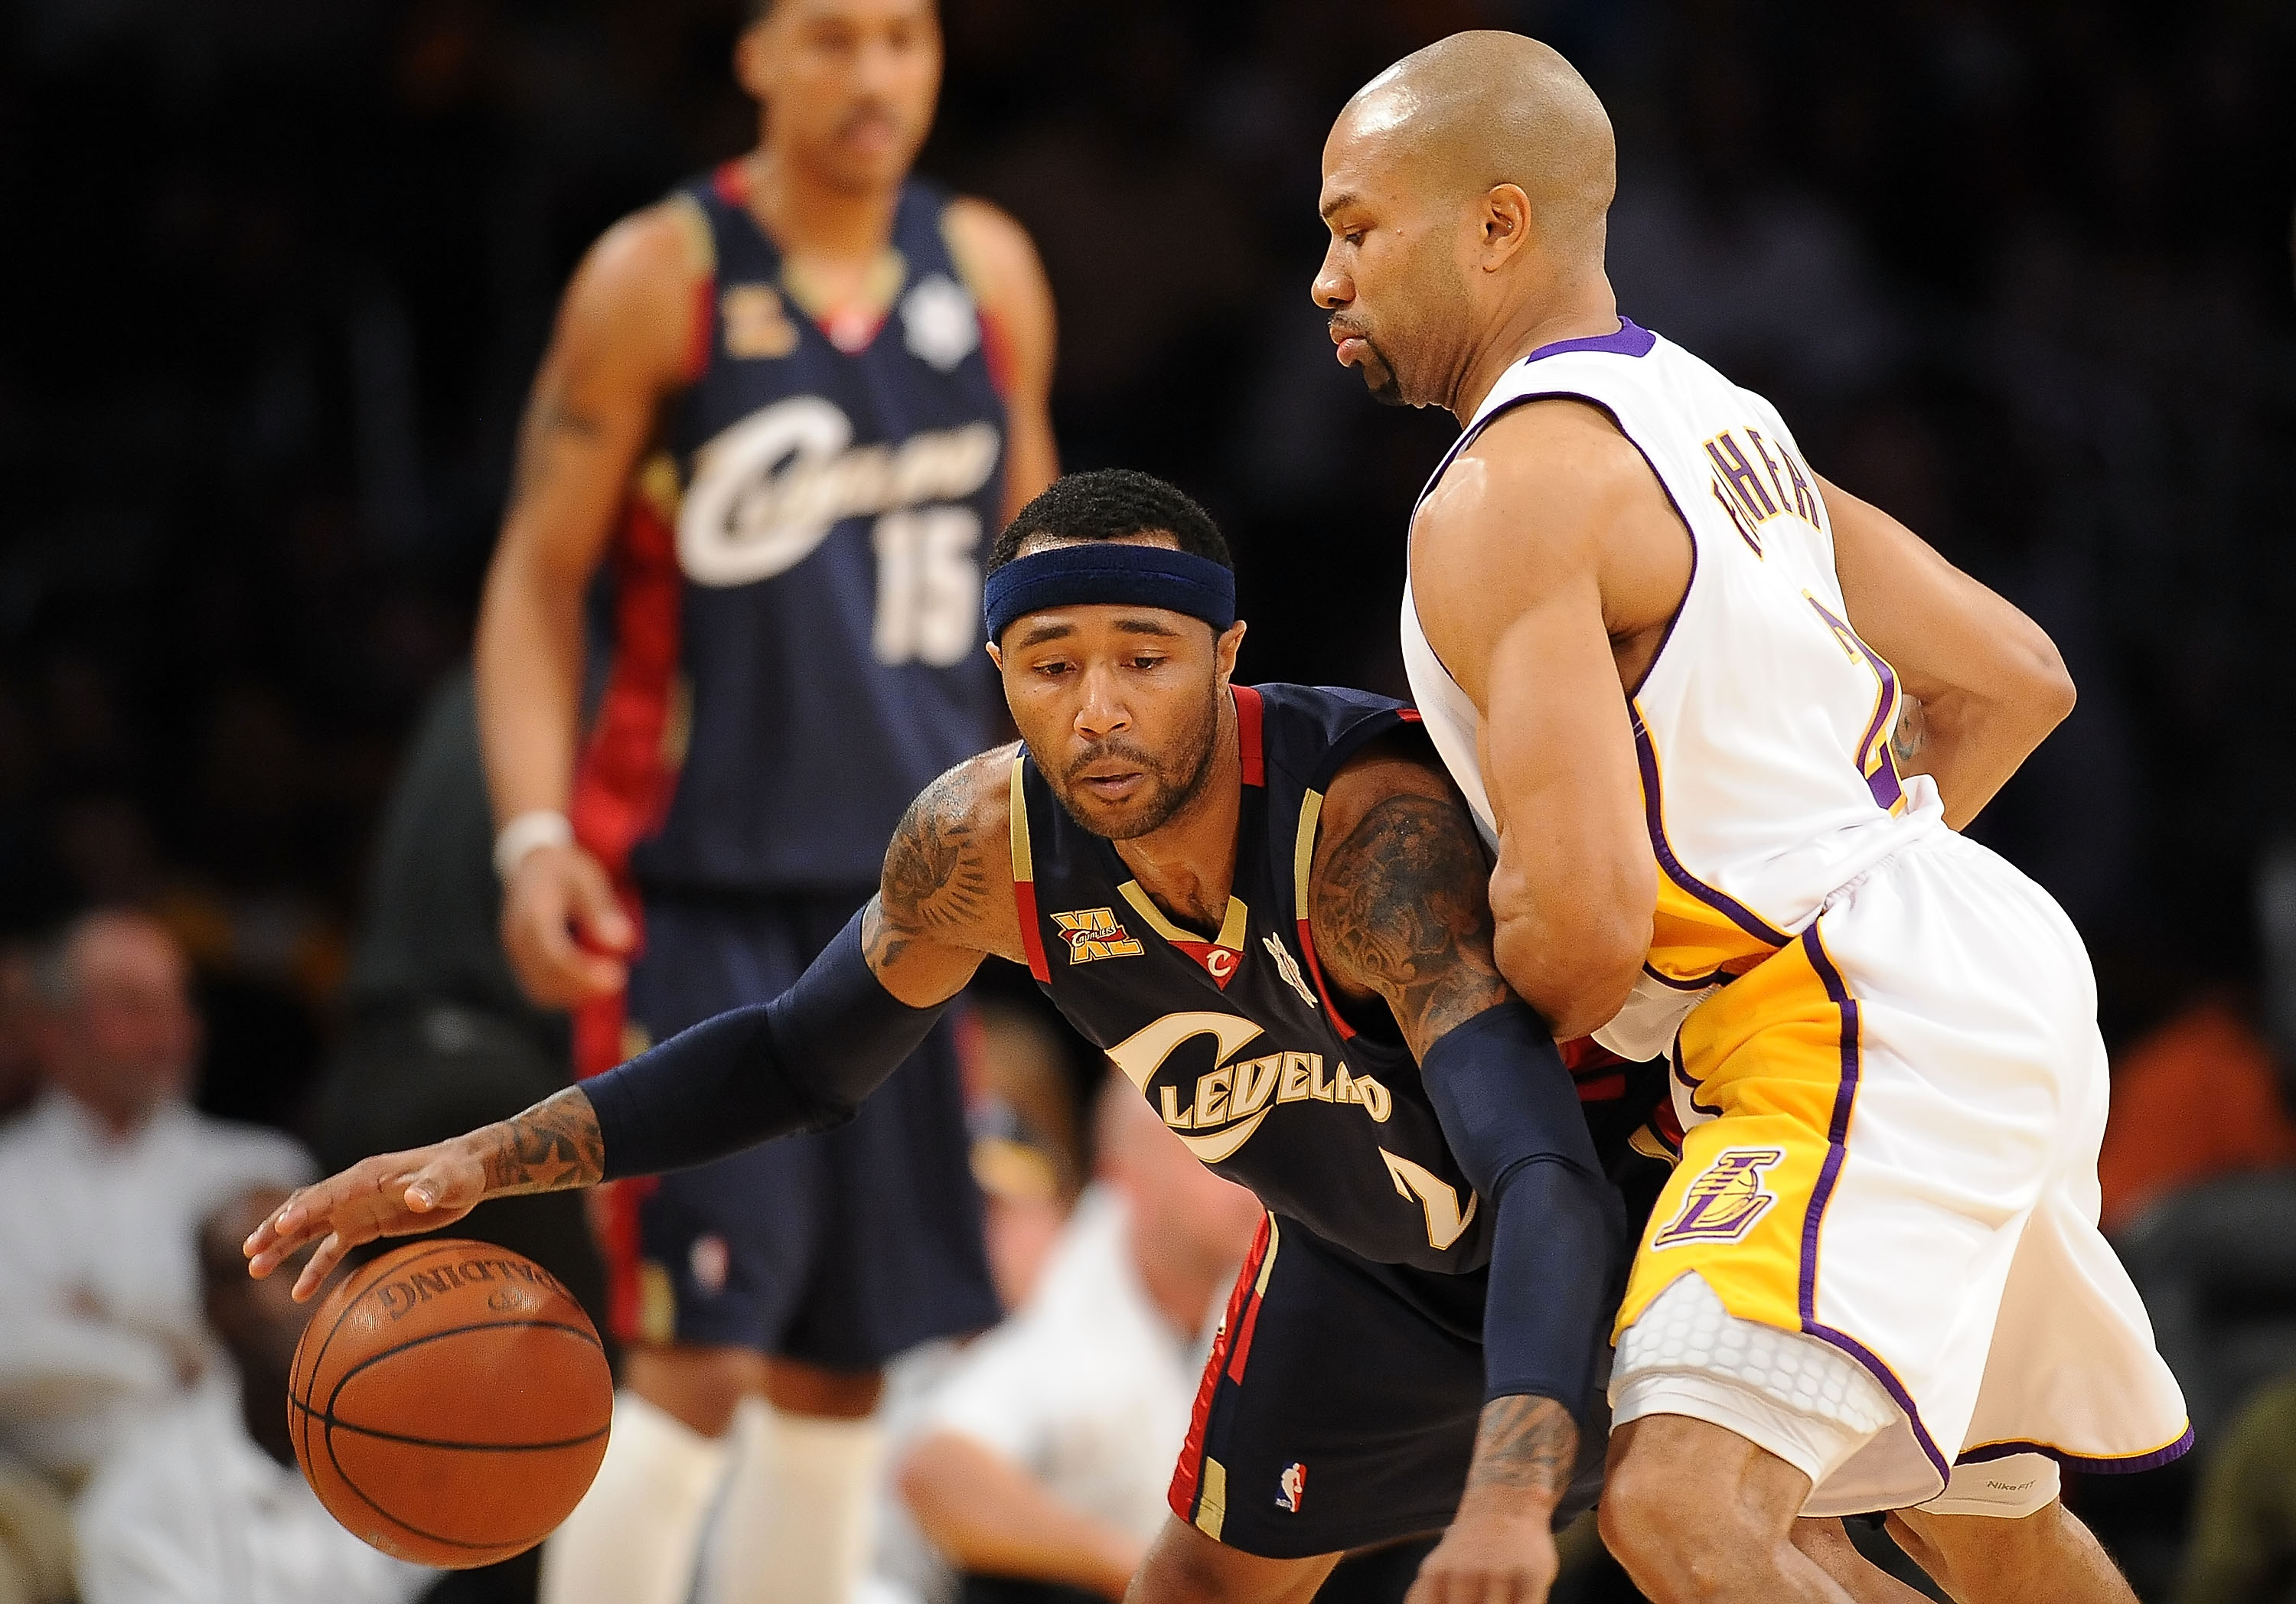 LOS ANGELES, CA - DECEMBER 25: Mo Williams #2 of the Cleveland Cavaliers drives against Derek Fisher #2 of the Los Angeles Lakers at Staples Center on December 25, 2009 in Los Angeles, California. NOTE TO USER: User expressly acknowledges and agrees that,